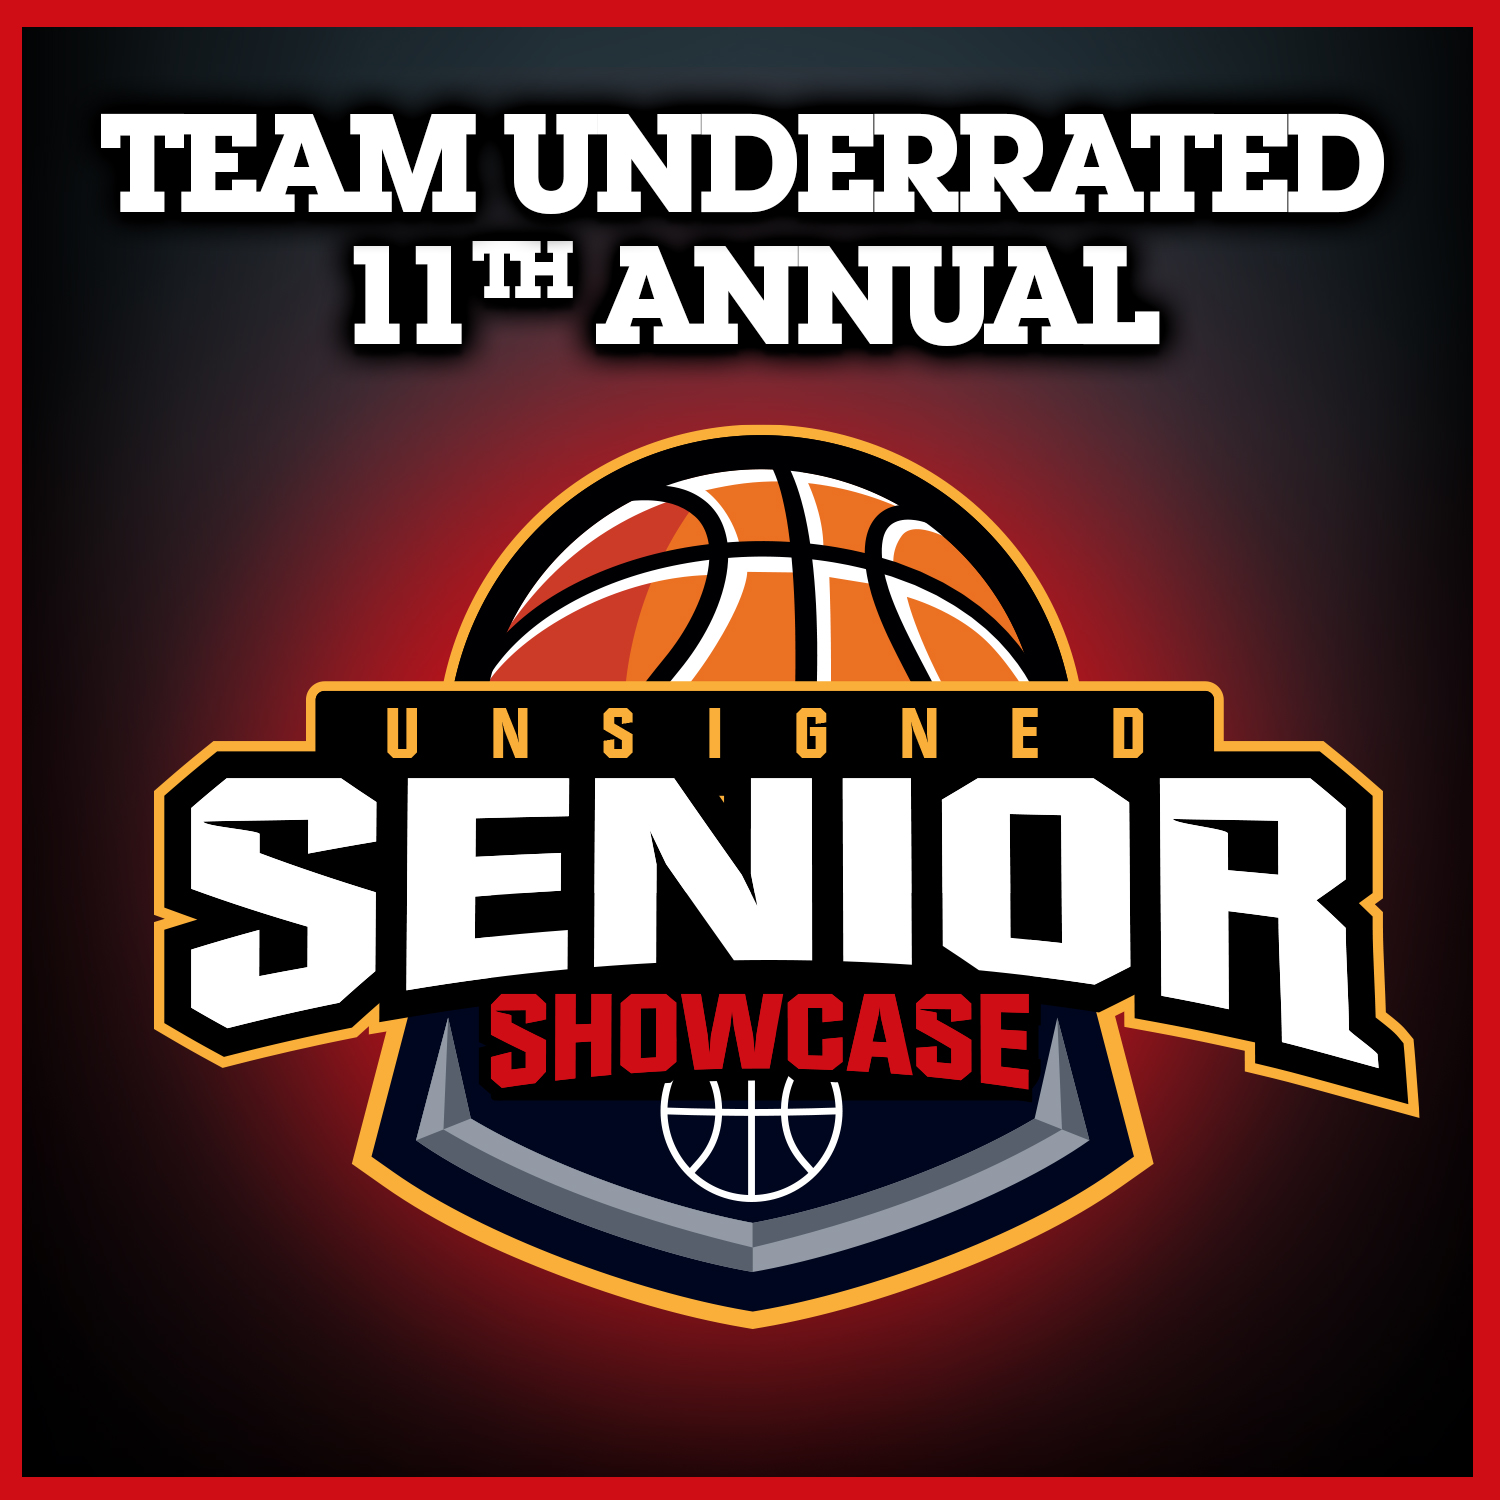 The 11th Annual Unsigned Senior Showcase 2022! Register Now!